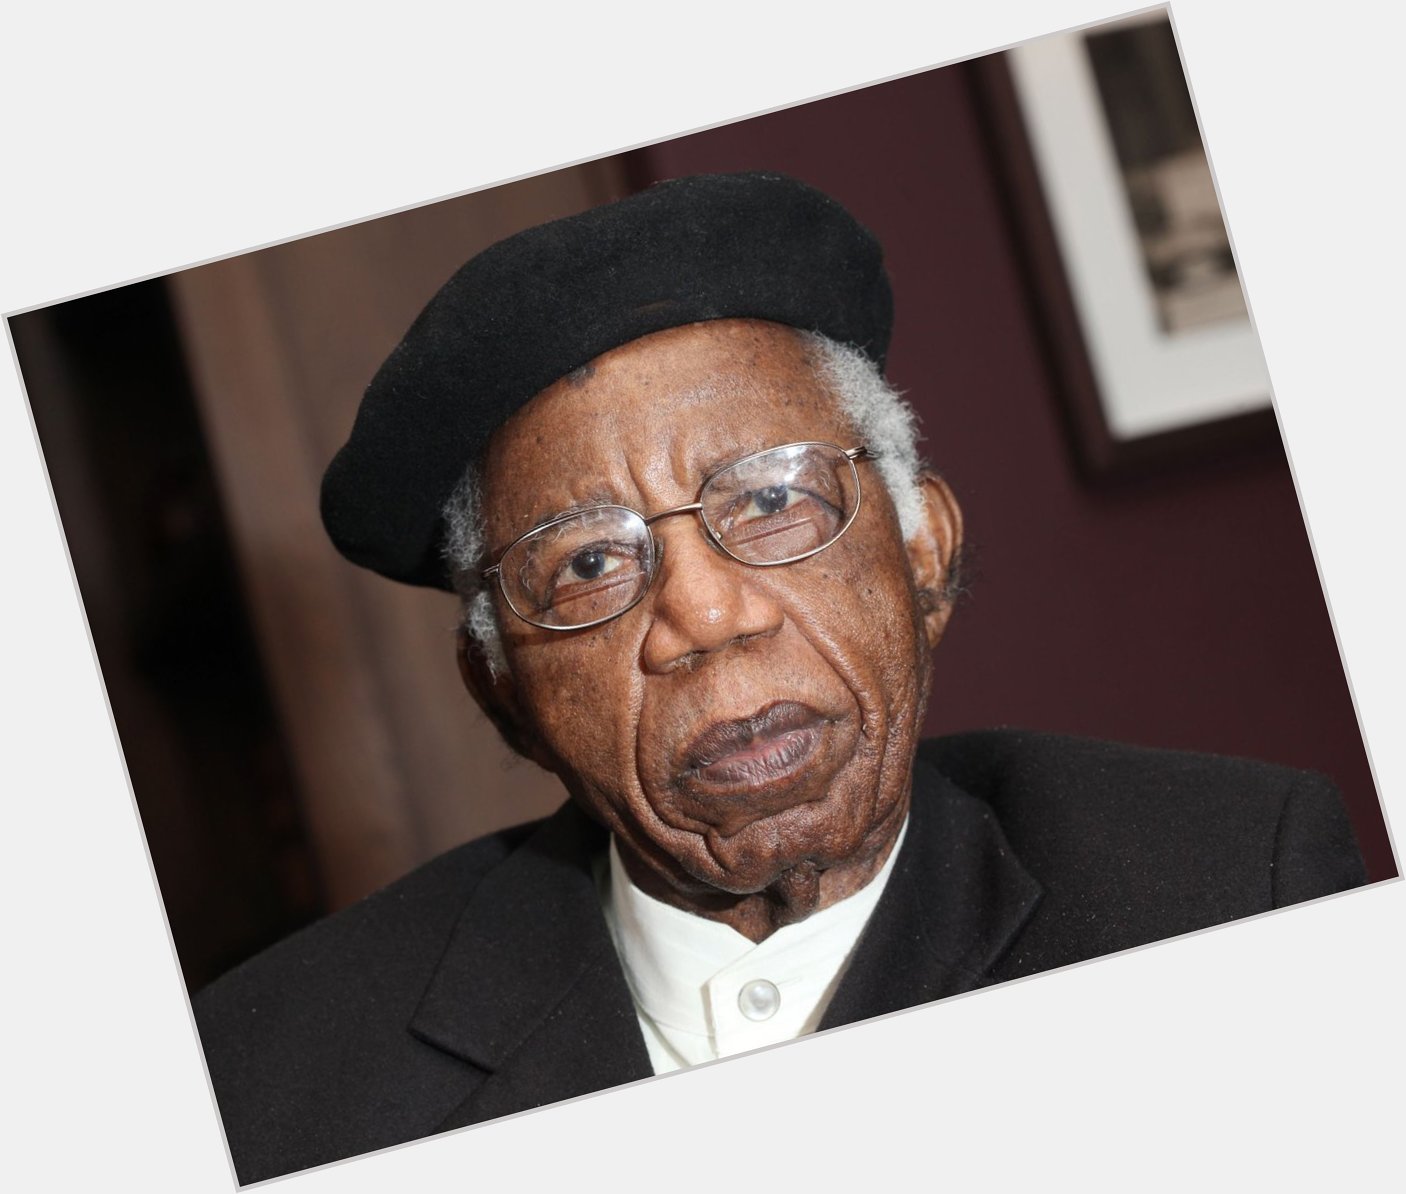 Chinua Achebe would have been 90 today. Happy birthday to the greatest.
Continue to rest in power. 